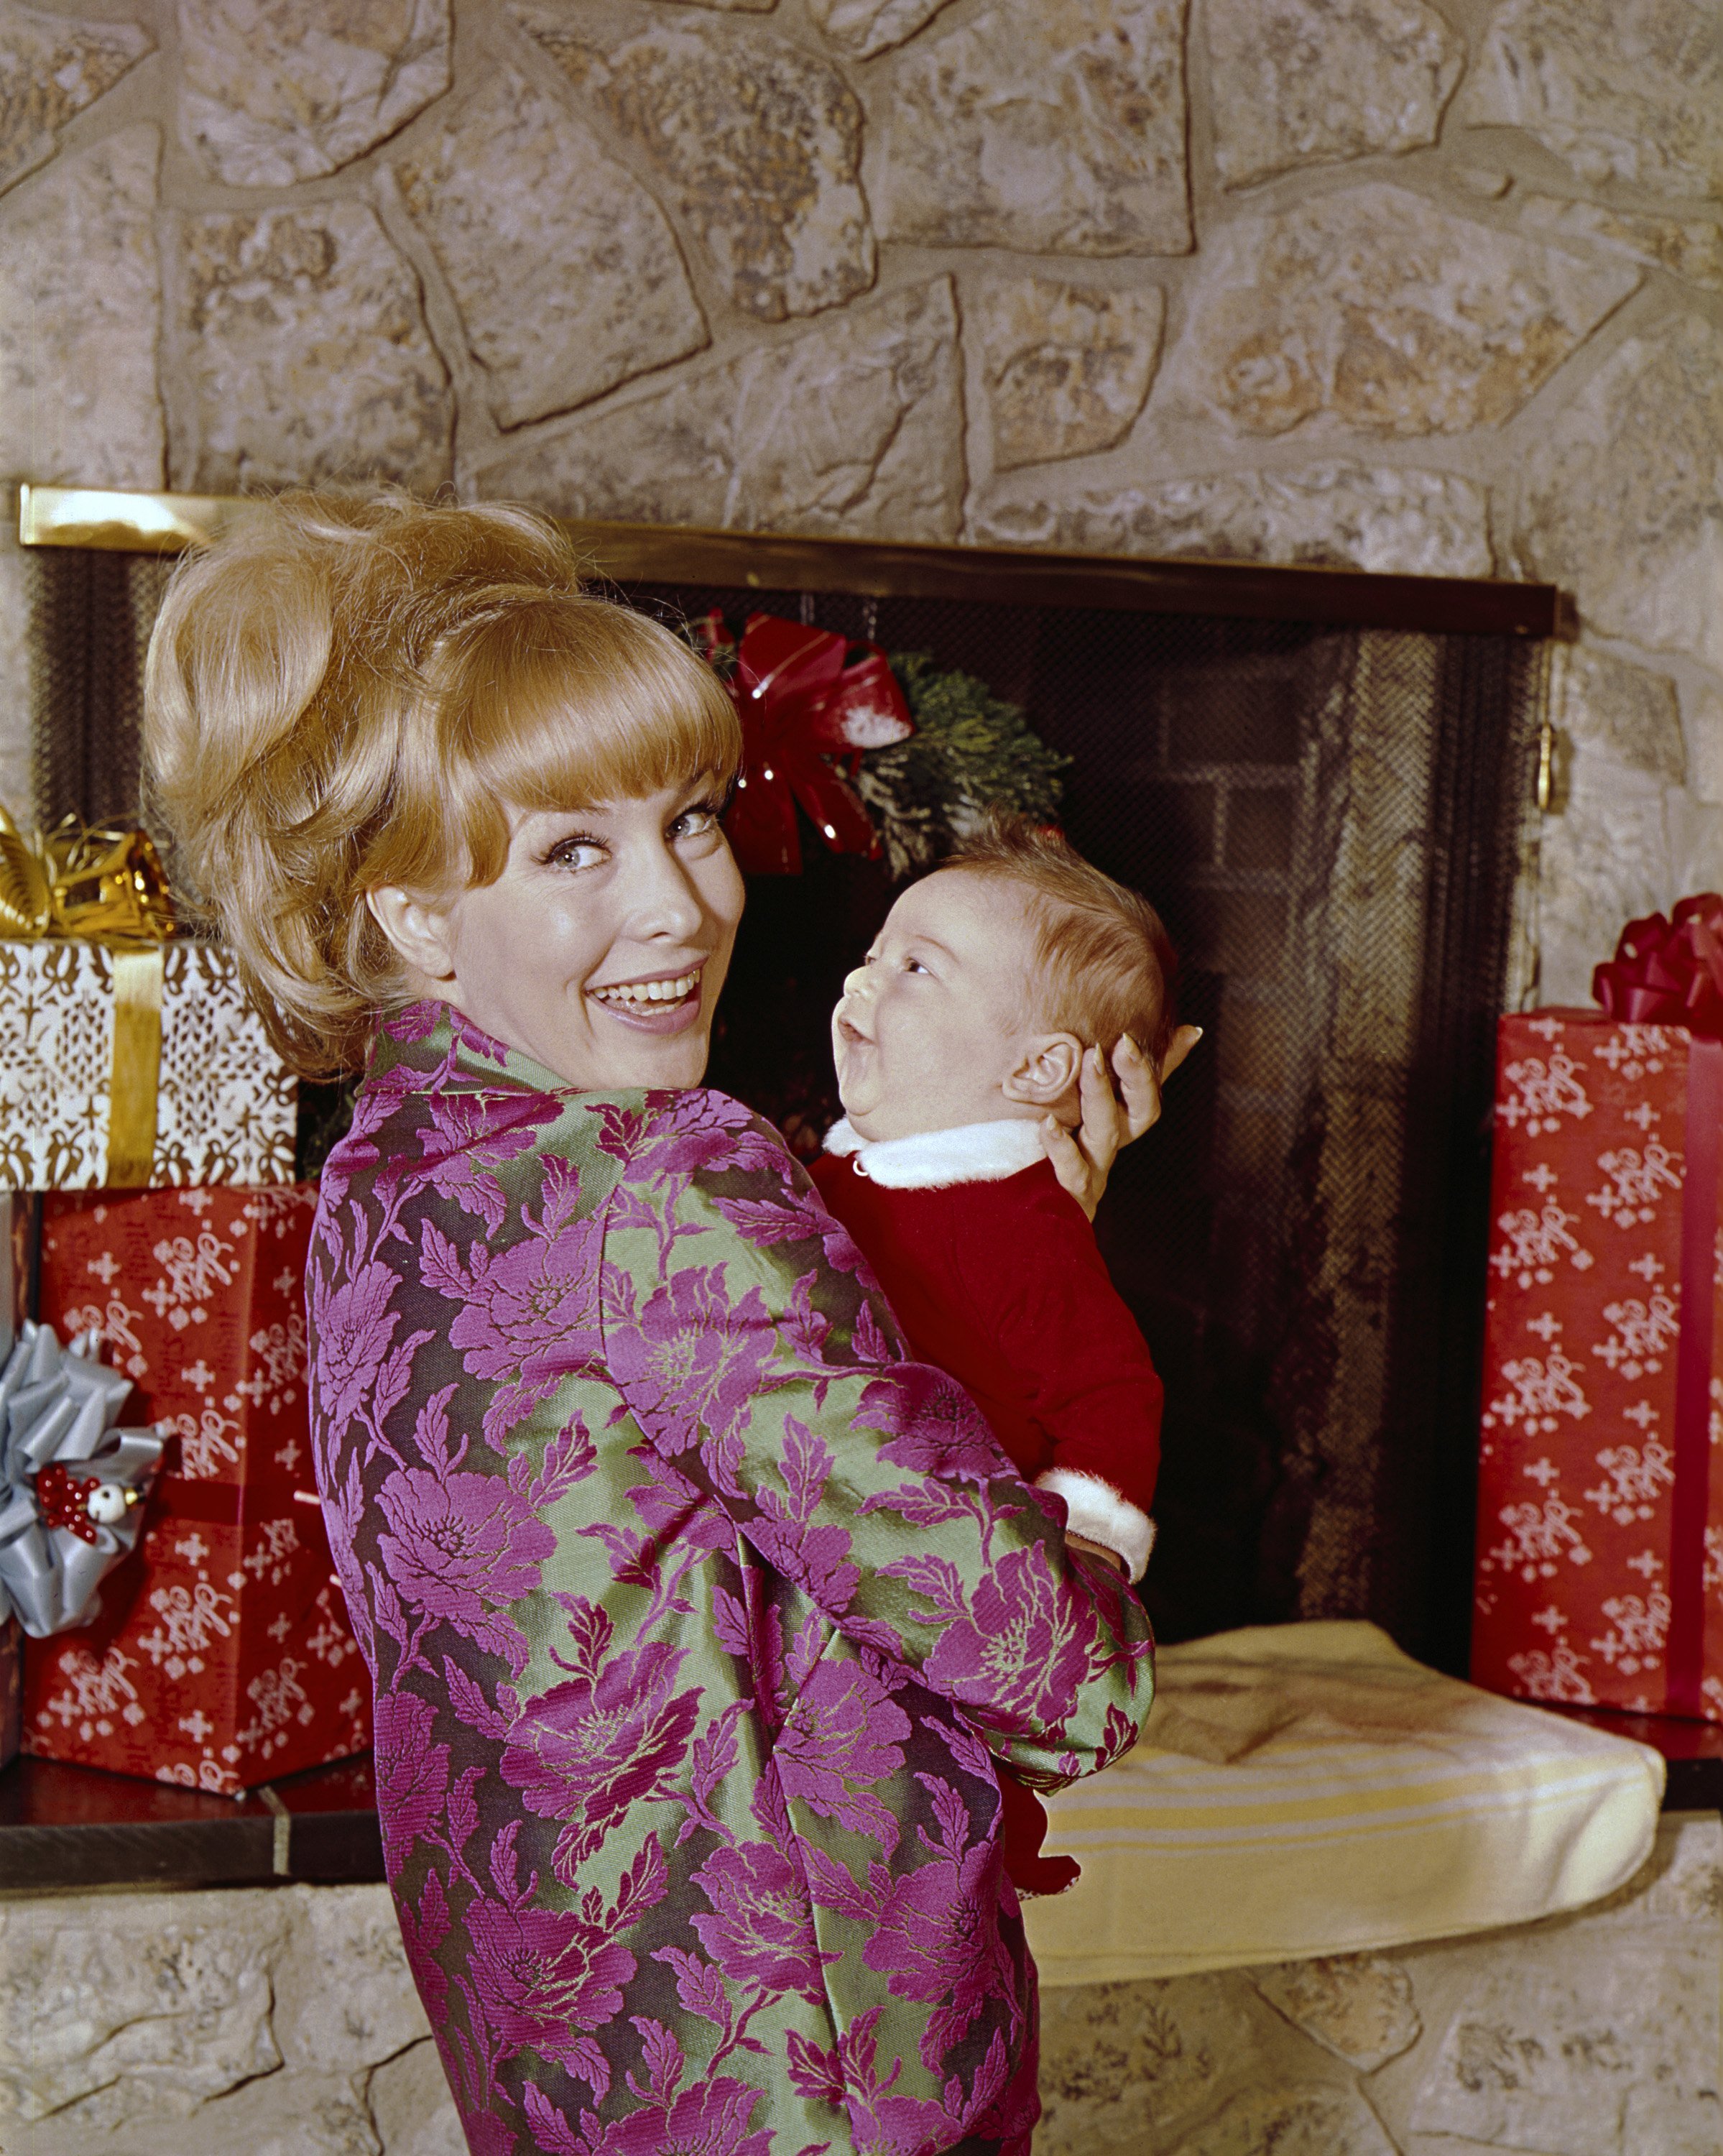 Barbara Eden holding a baby | Source: Getty Images